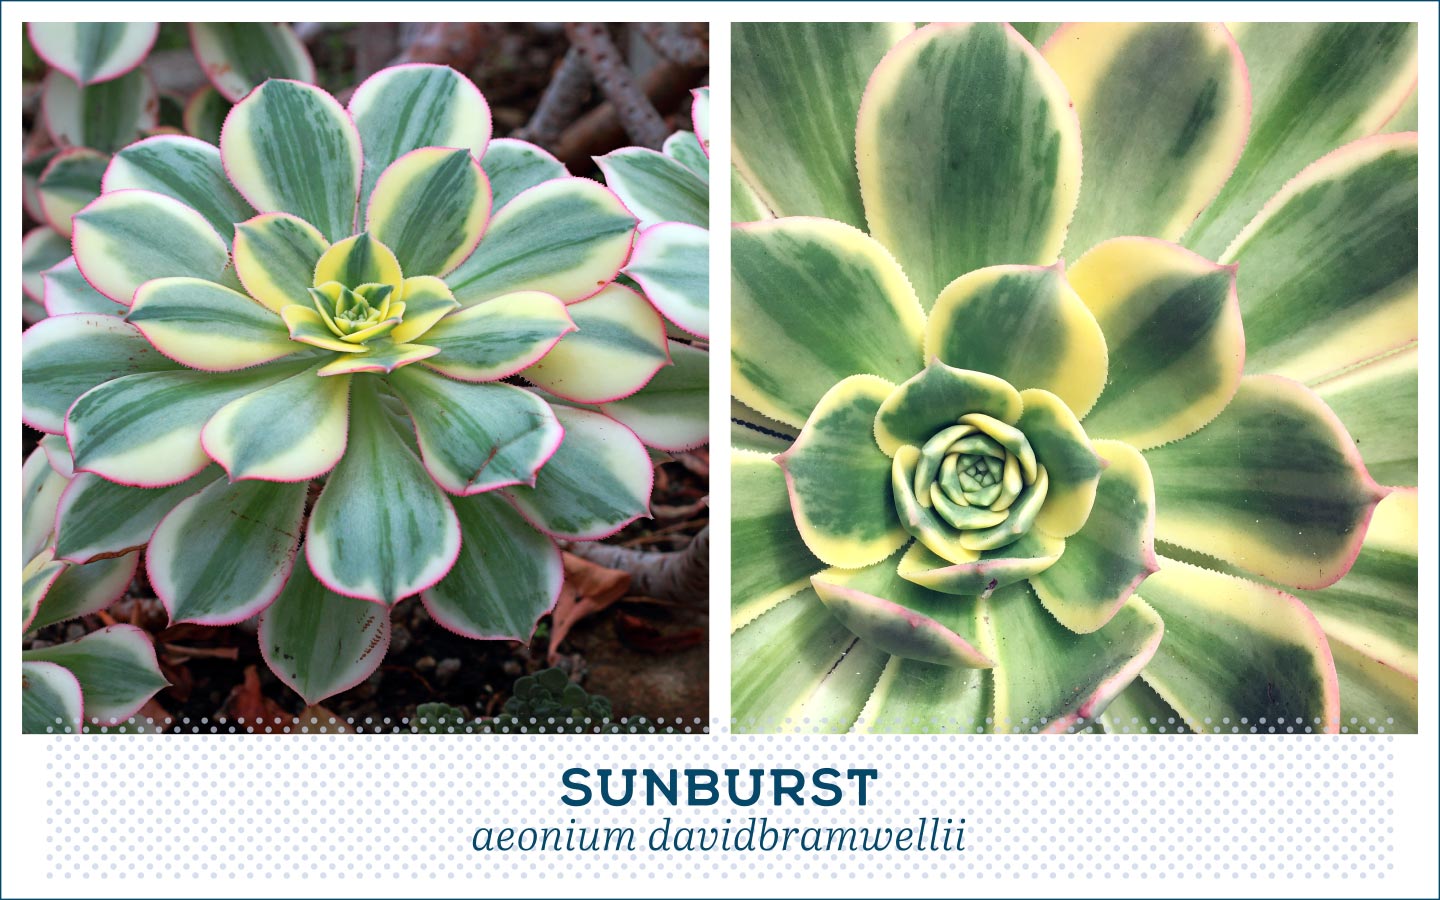 types of succulents